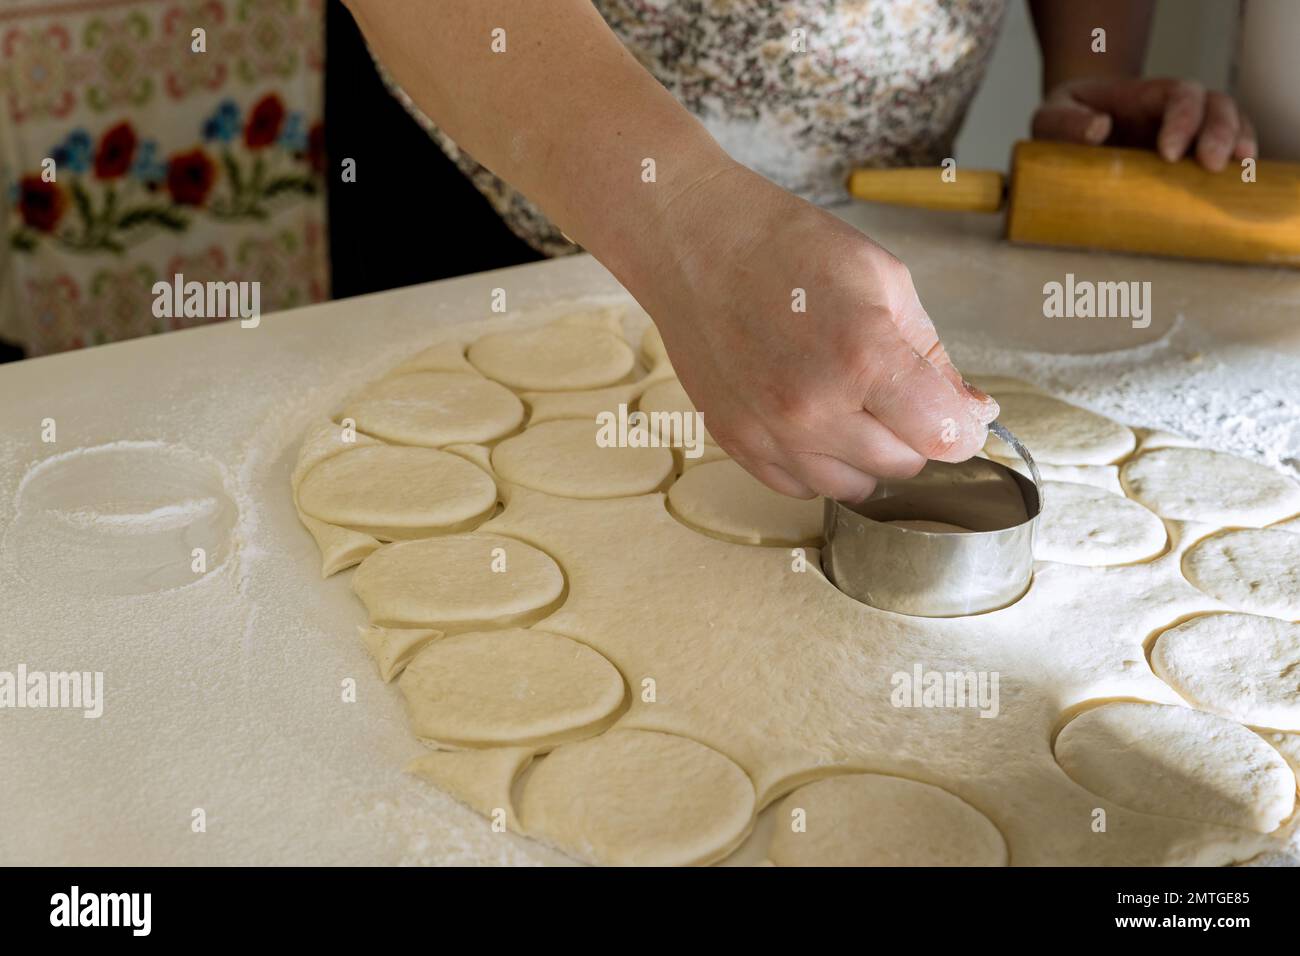 Raw homemade dough for donuts that has been cut into round pieces with rolling pin on bakery work table Stock Photo